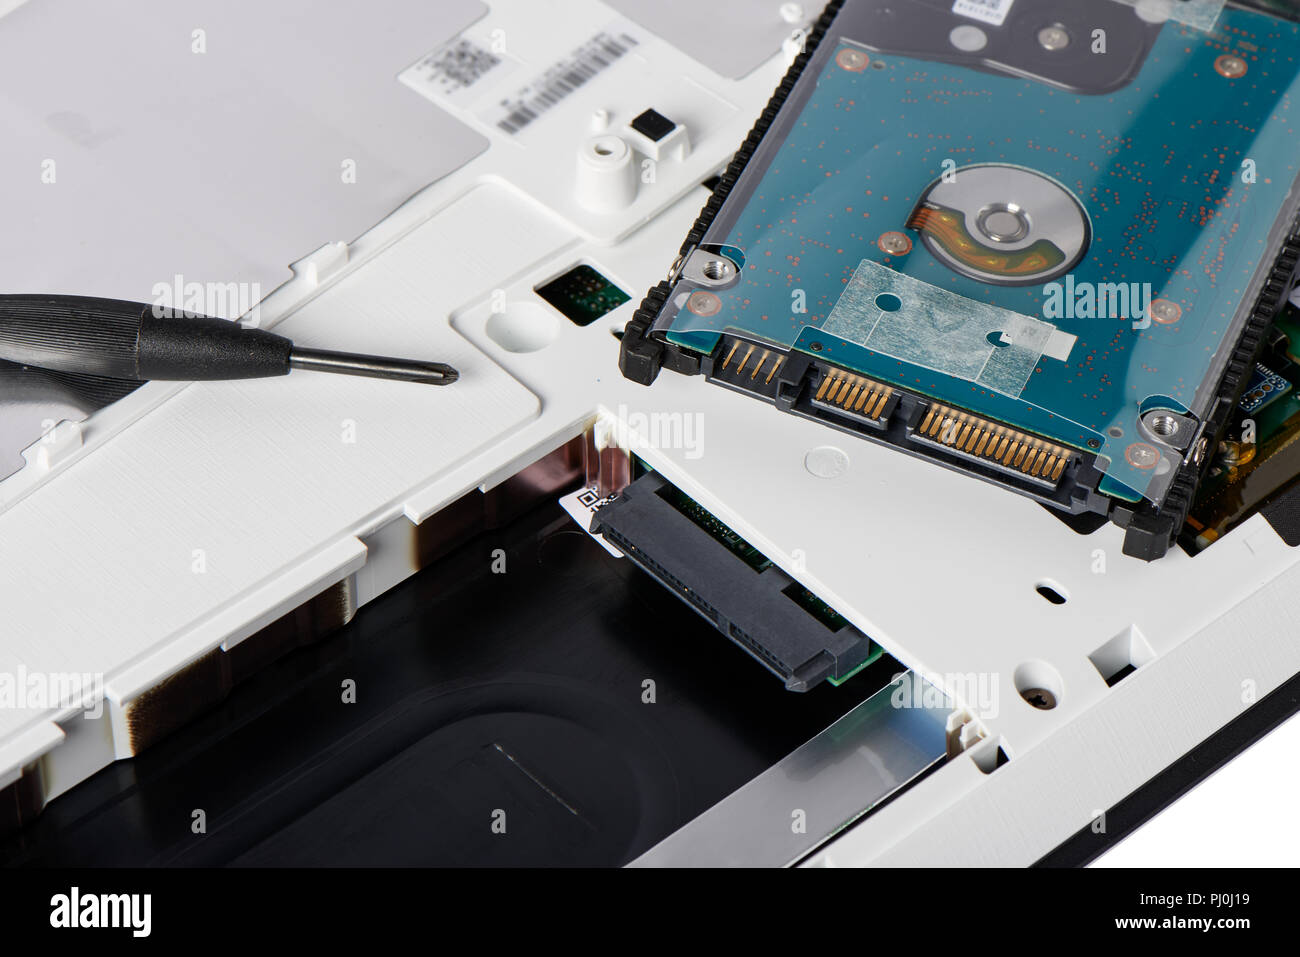 2.5inch hard disk drive with aseembly bracket and SATA slot on the access panel of laptop computer for hardware upgrade. Stock Photo